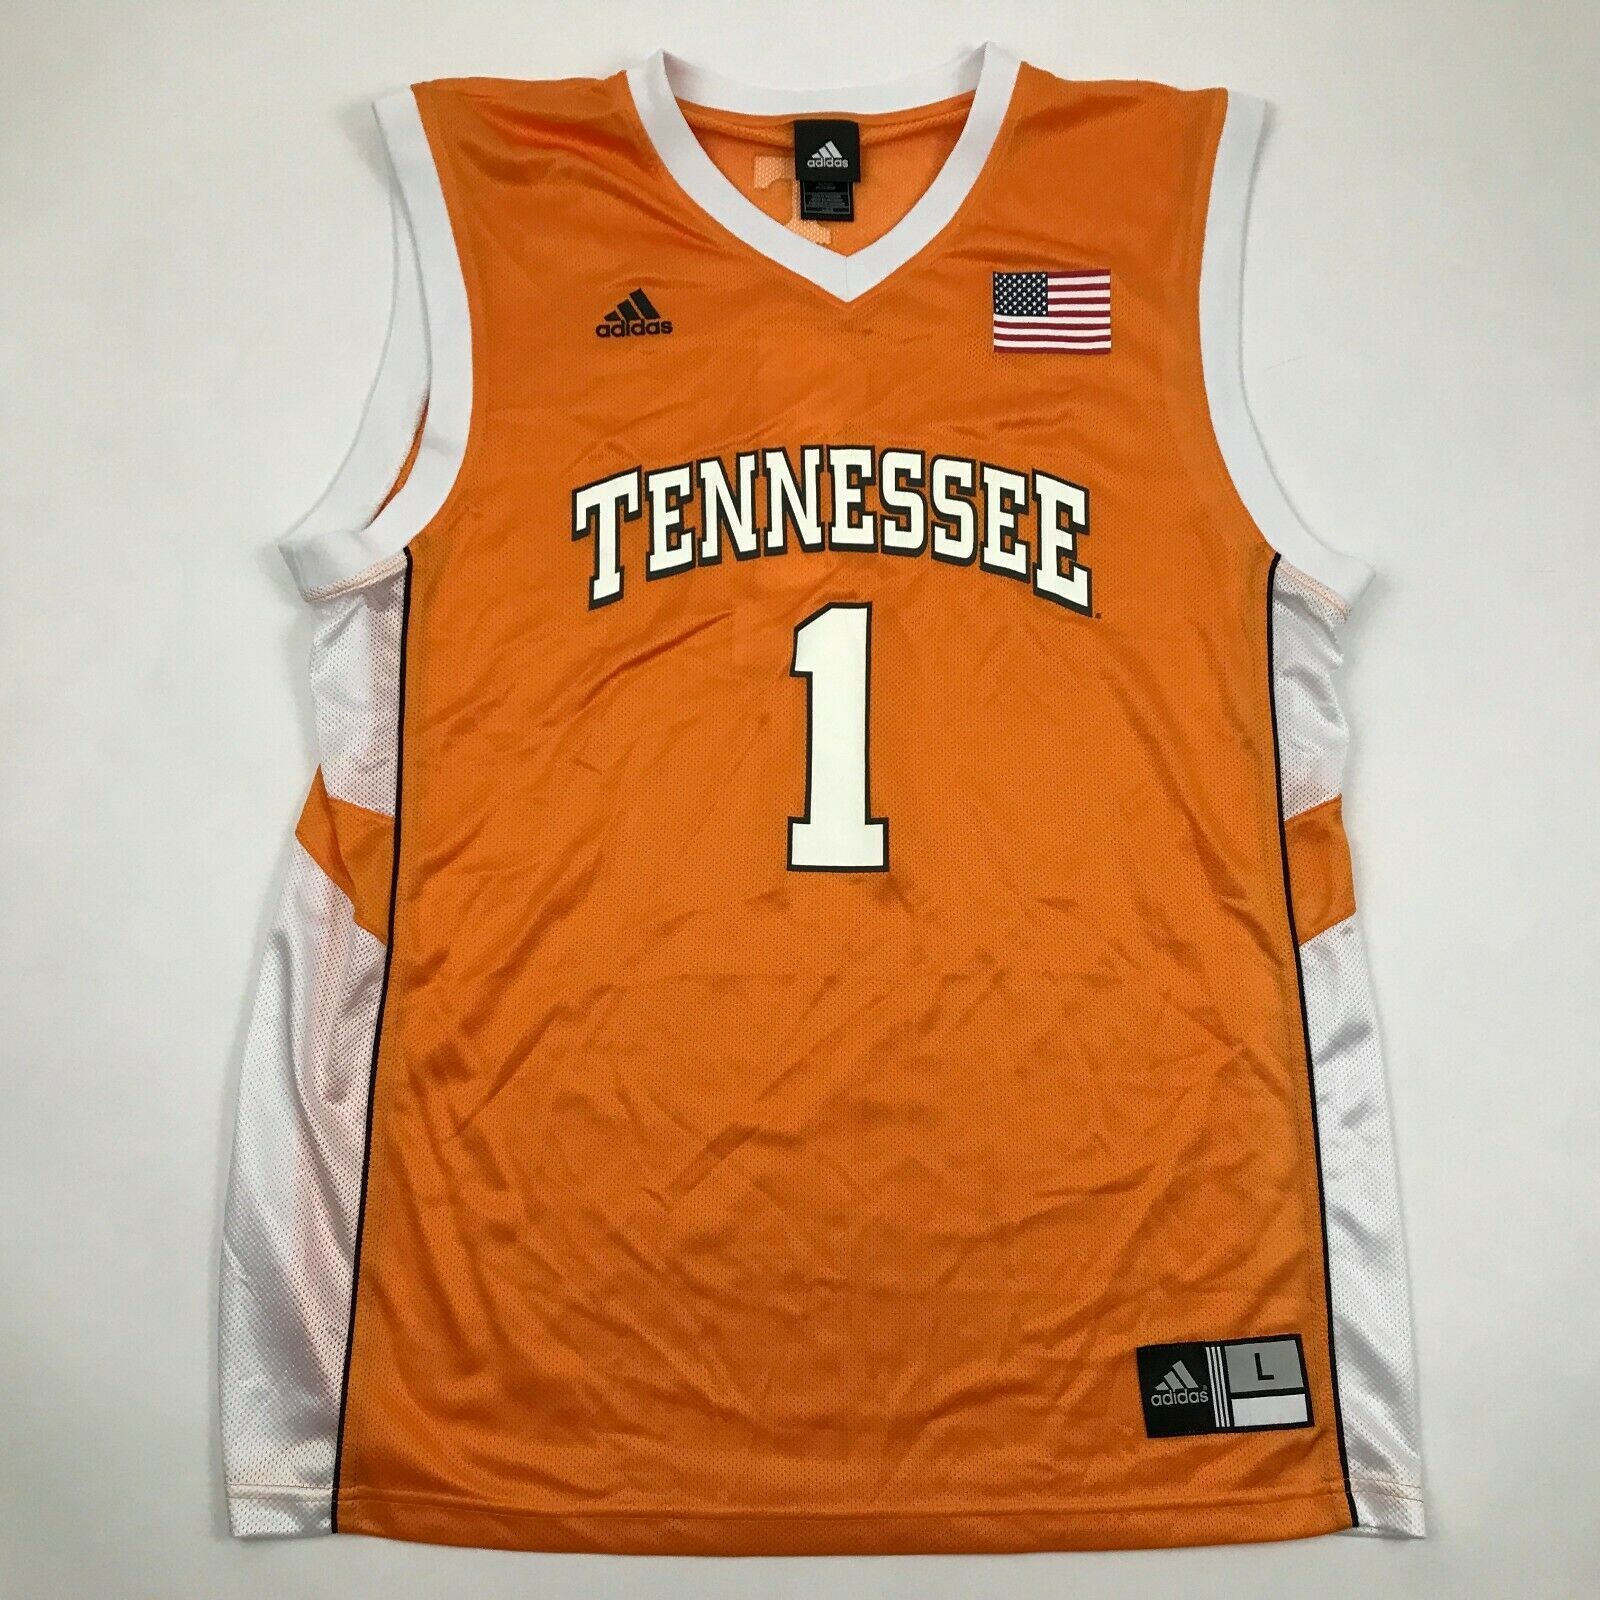 NEW Adidas TENNESSEE Basketball Jersey Mens Size L Adult Orange ...